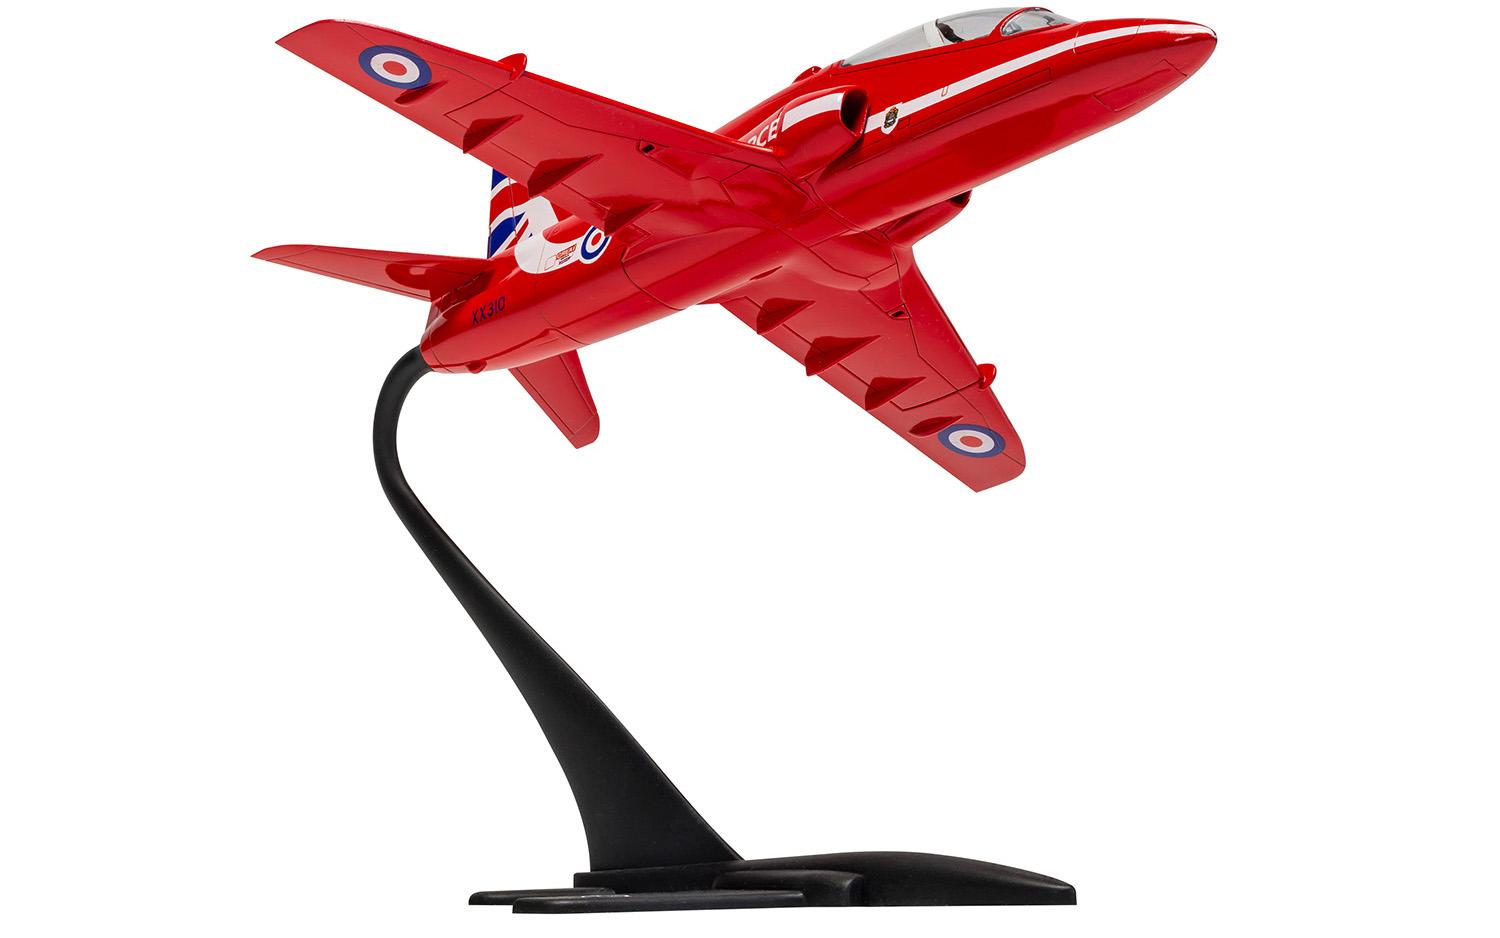 View from below the model Red Arrows plane,